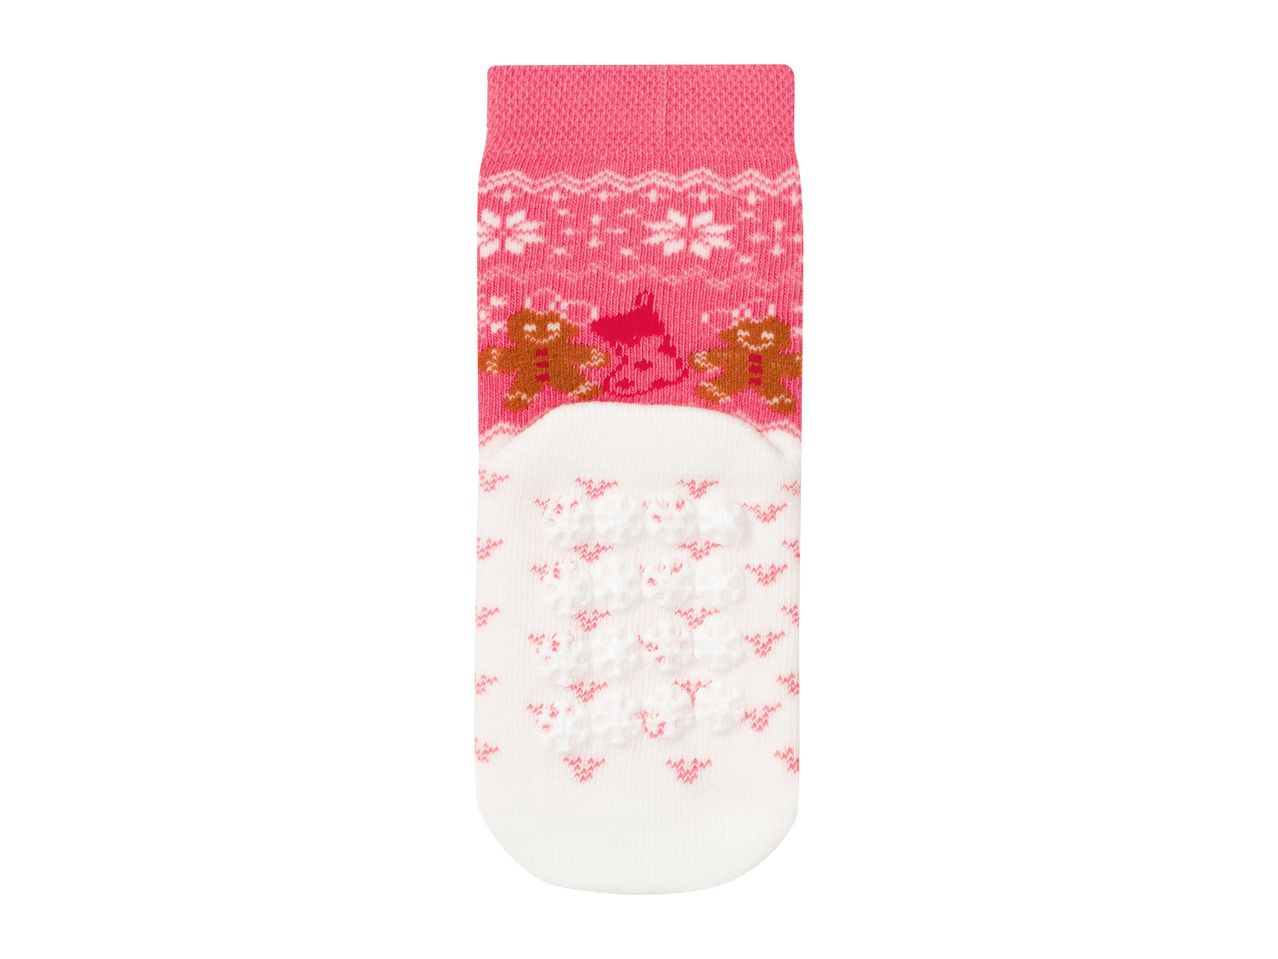 Go to full screen view: Lupilu Younger Kids’ Christmas Thermal Socks - 2 pairs - Image 6